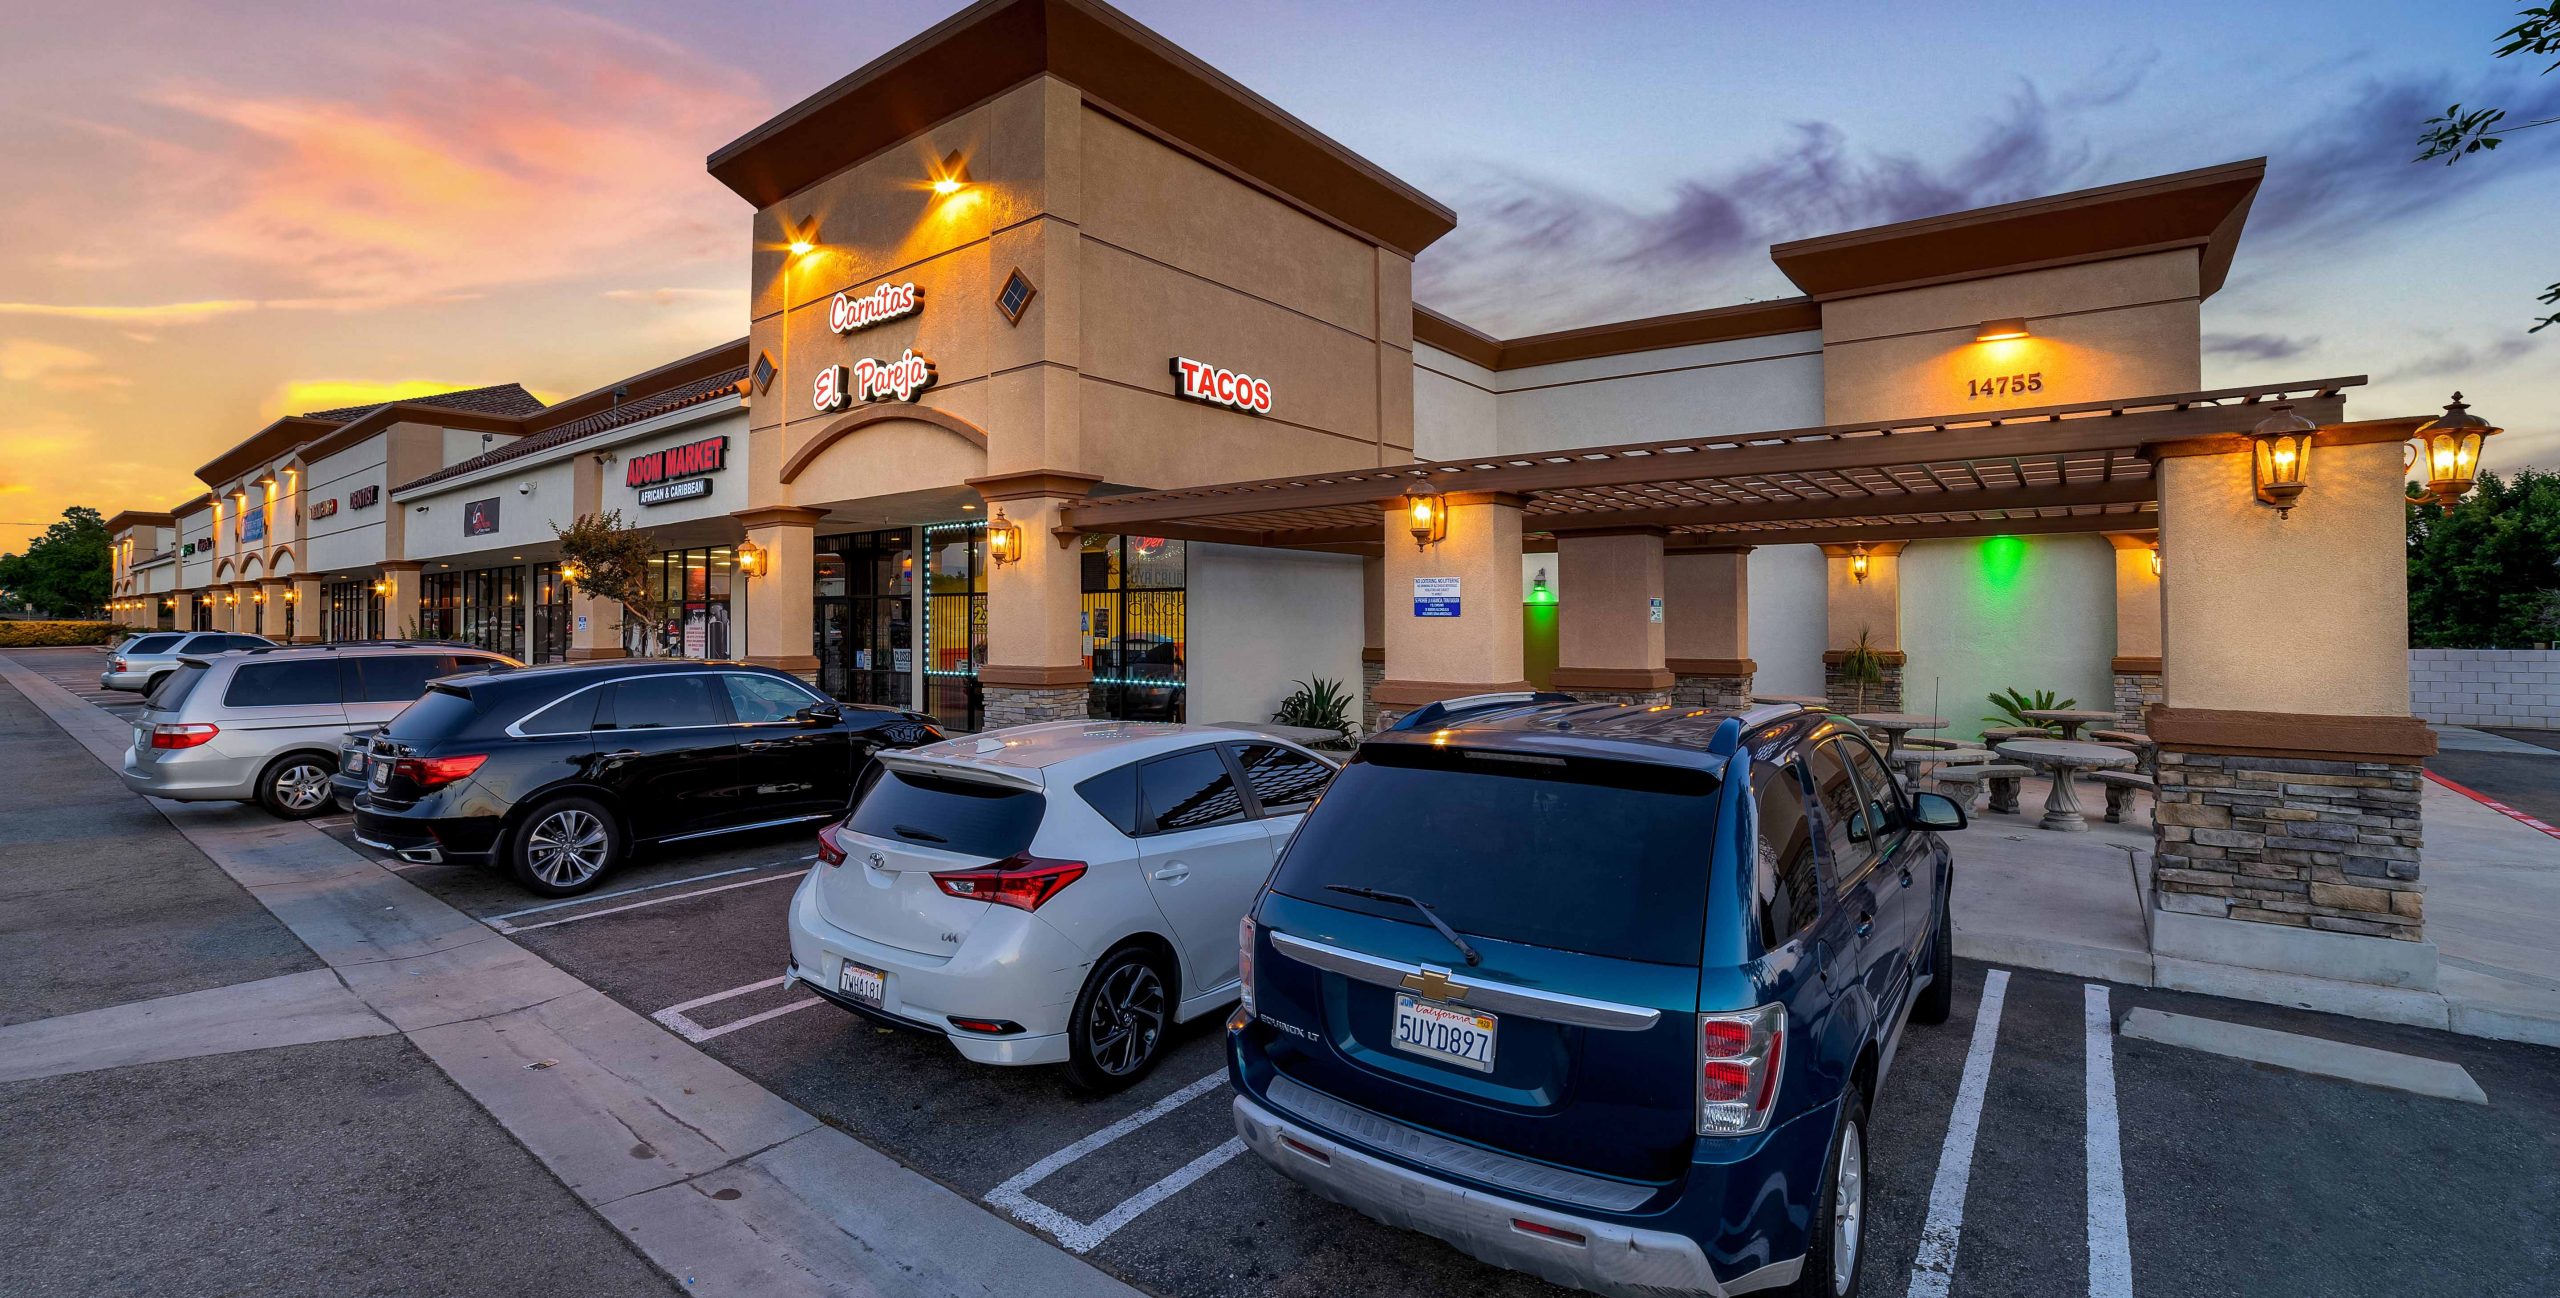 Greg Bedell sells Foothill Village in Fontana, CA for $5.3M